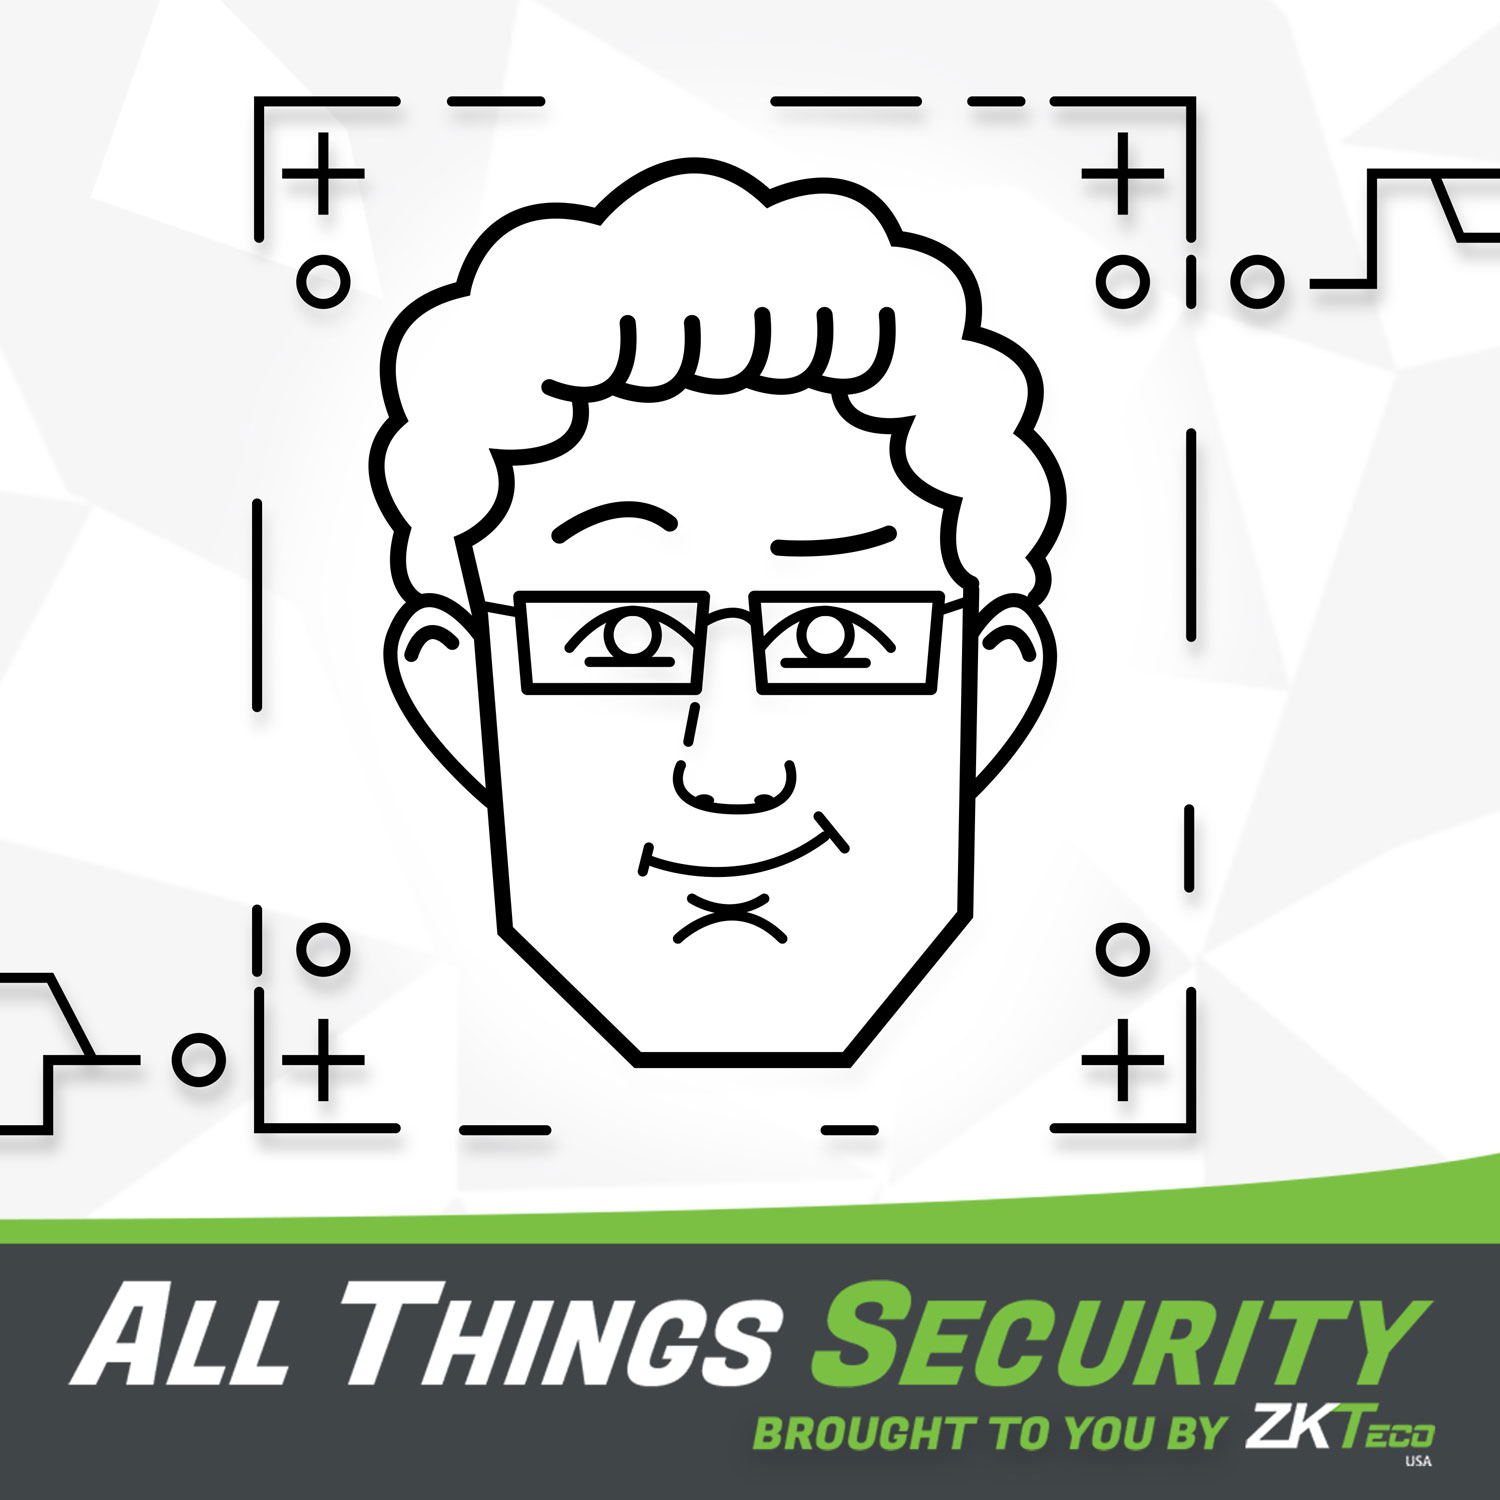 All Things Security